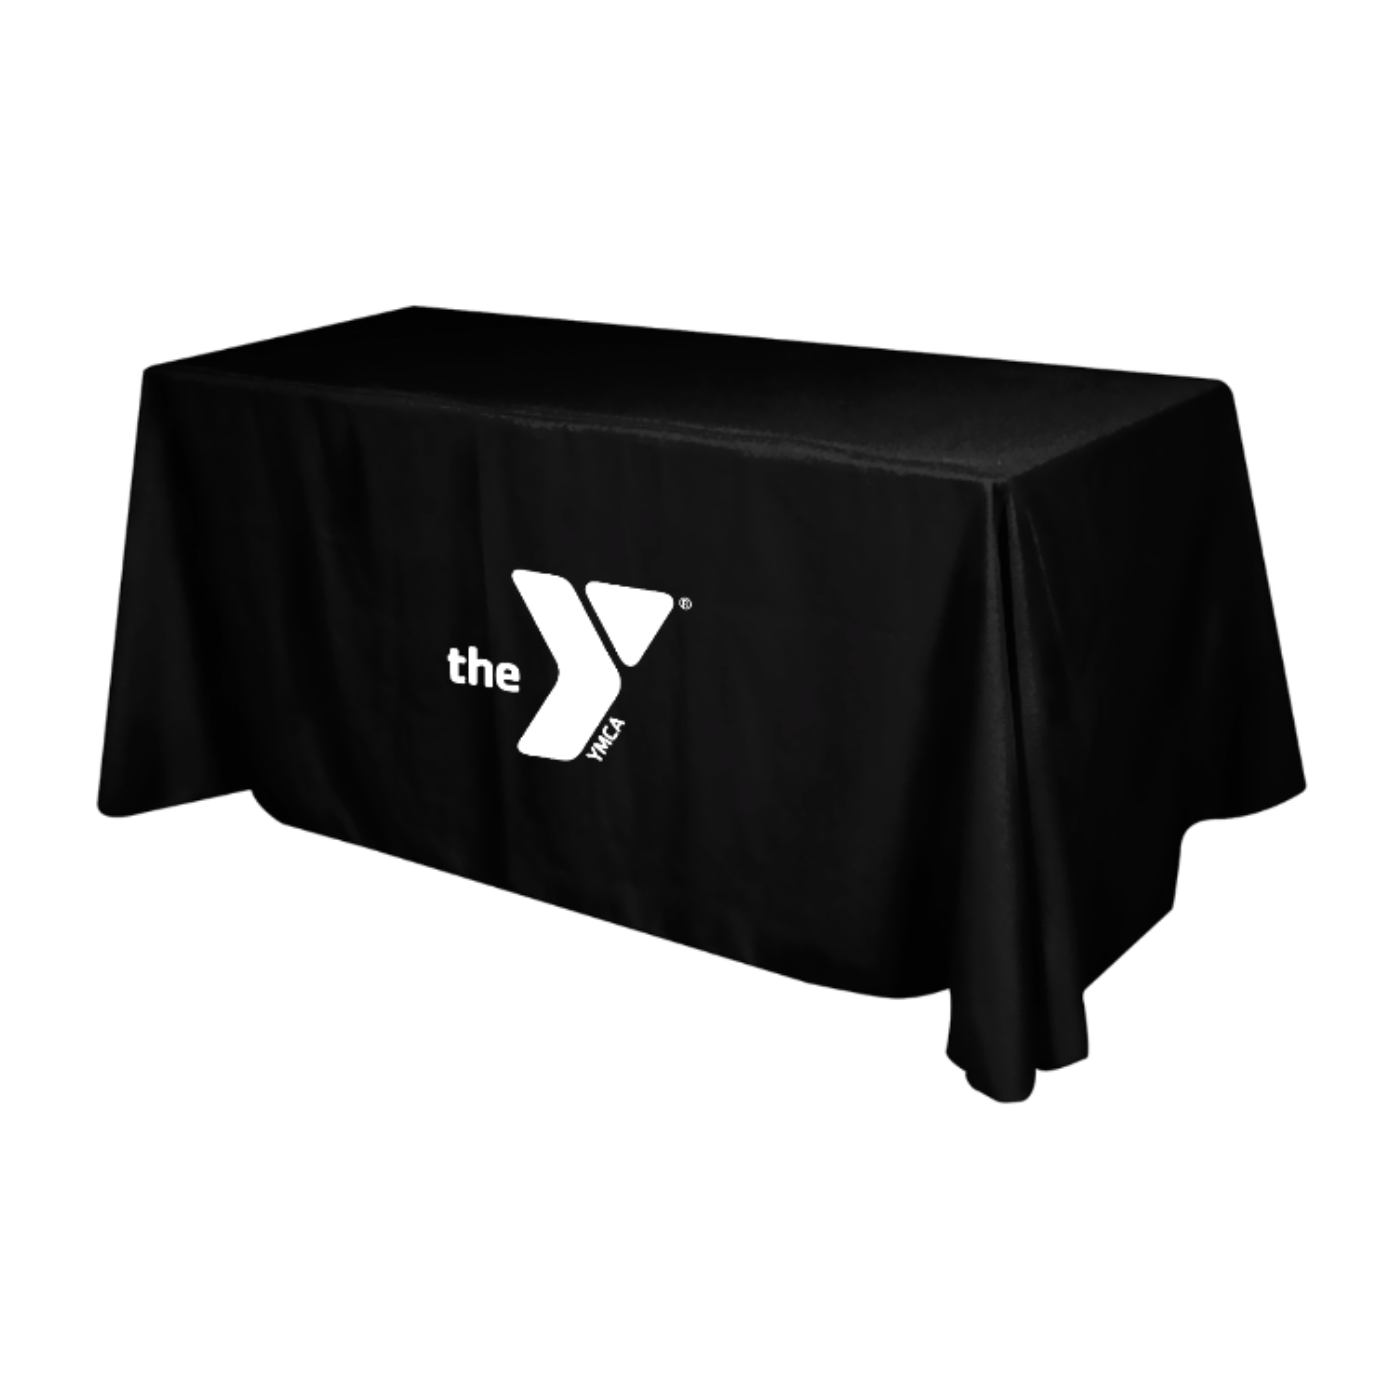 Flat Polyester 4-Sided Table Cover - fits 6' standard table